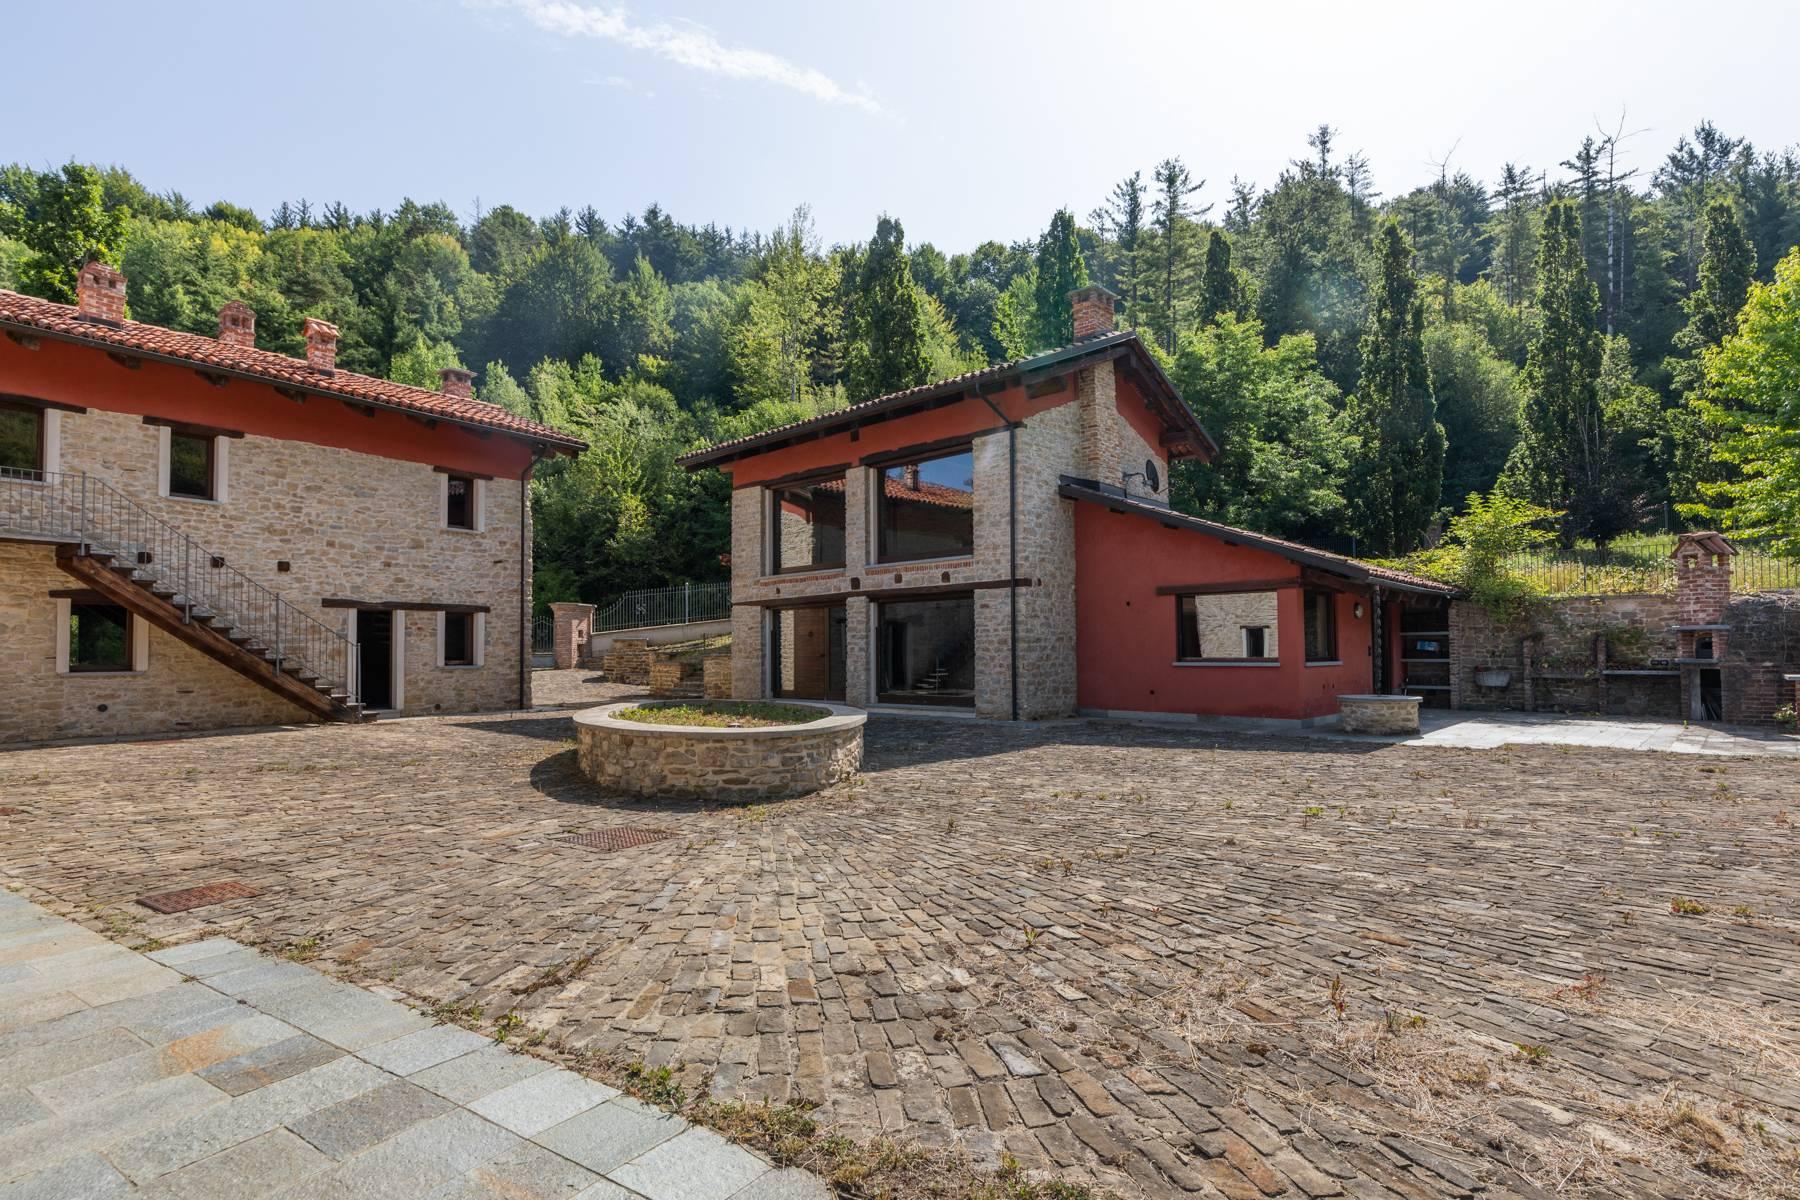 Lovely small private village in the Langhe region - 2